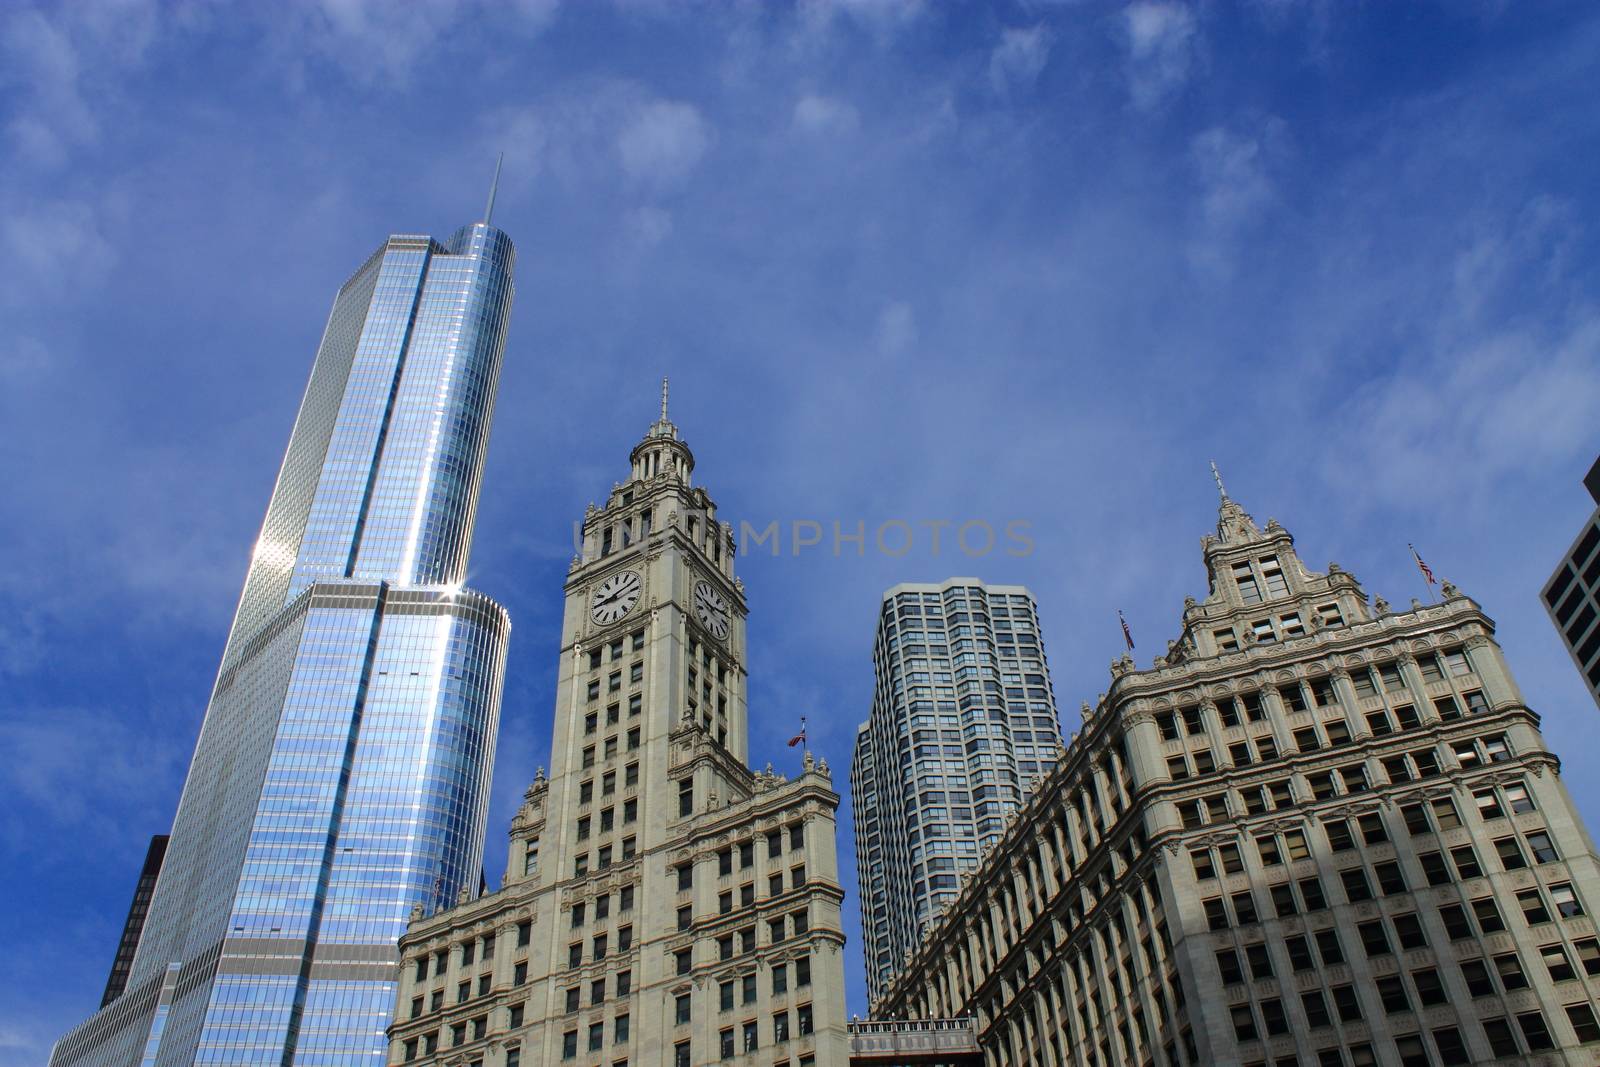 Chicao Wrigley Building and Trump Tower by Ffooter